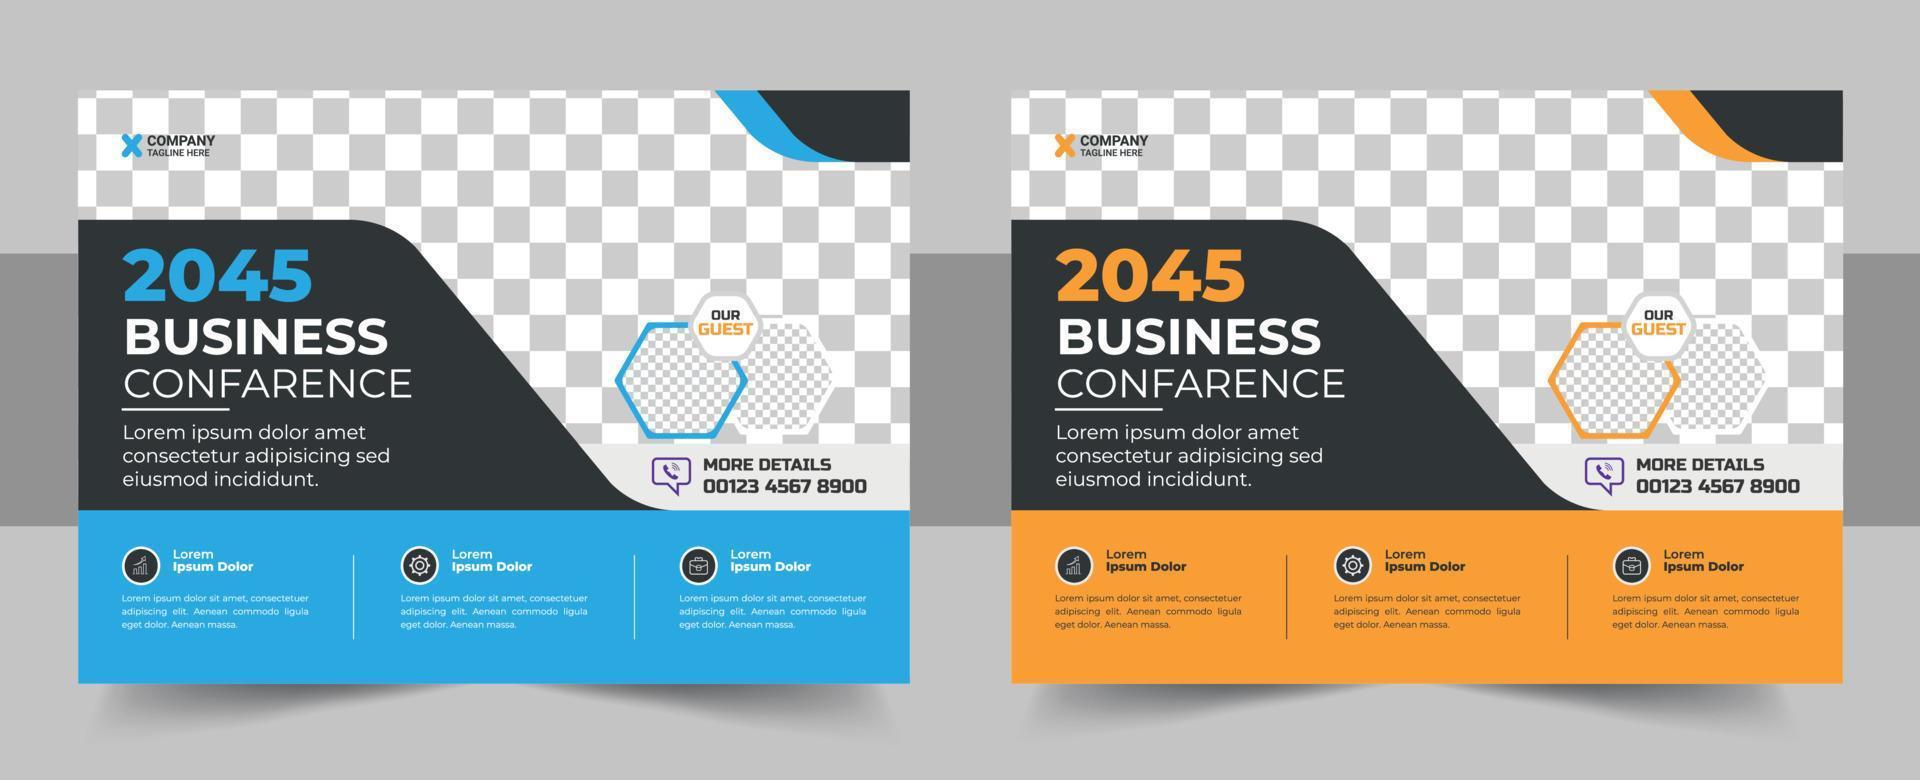 Corporate horizontal business conference flyer design vector